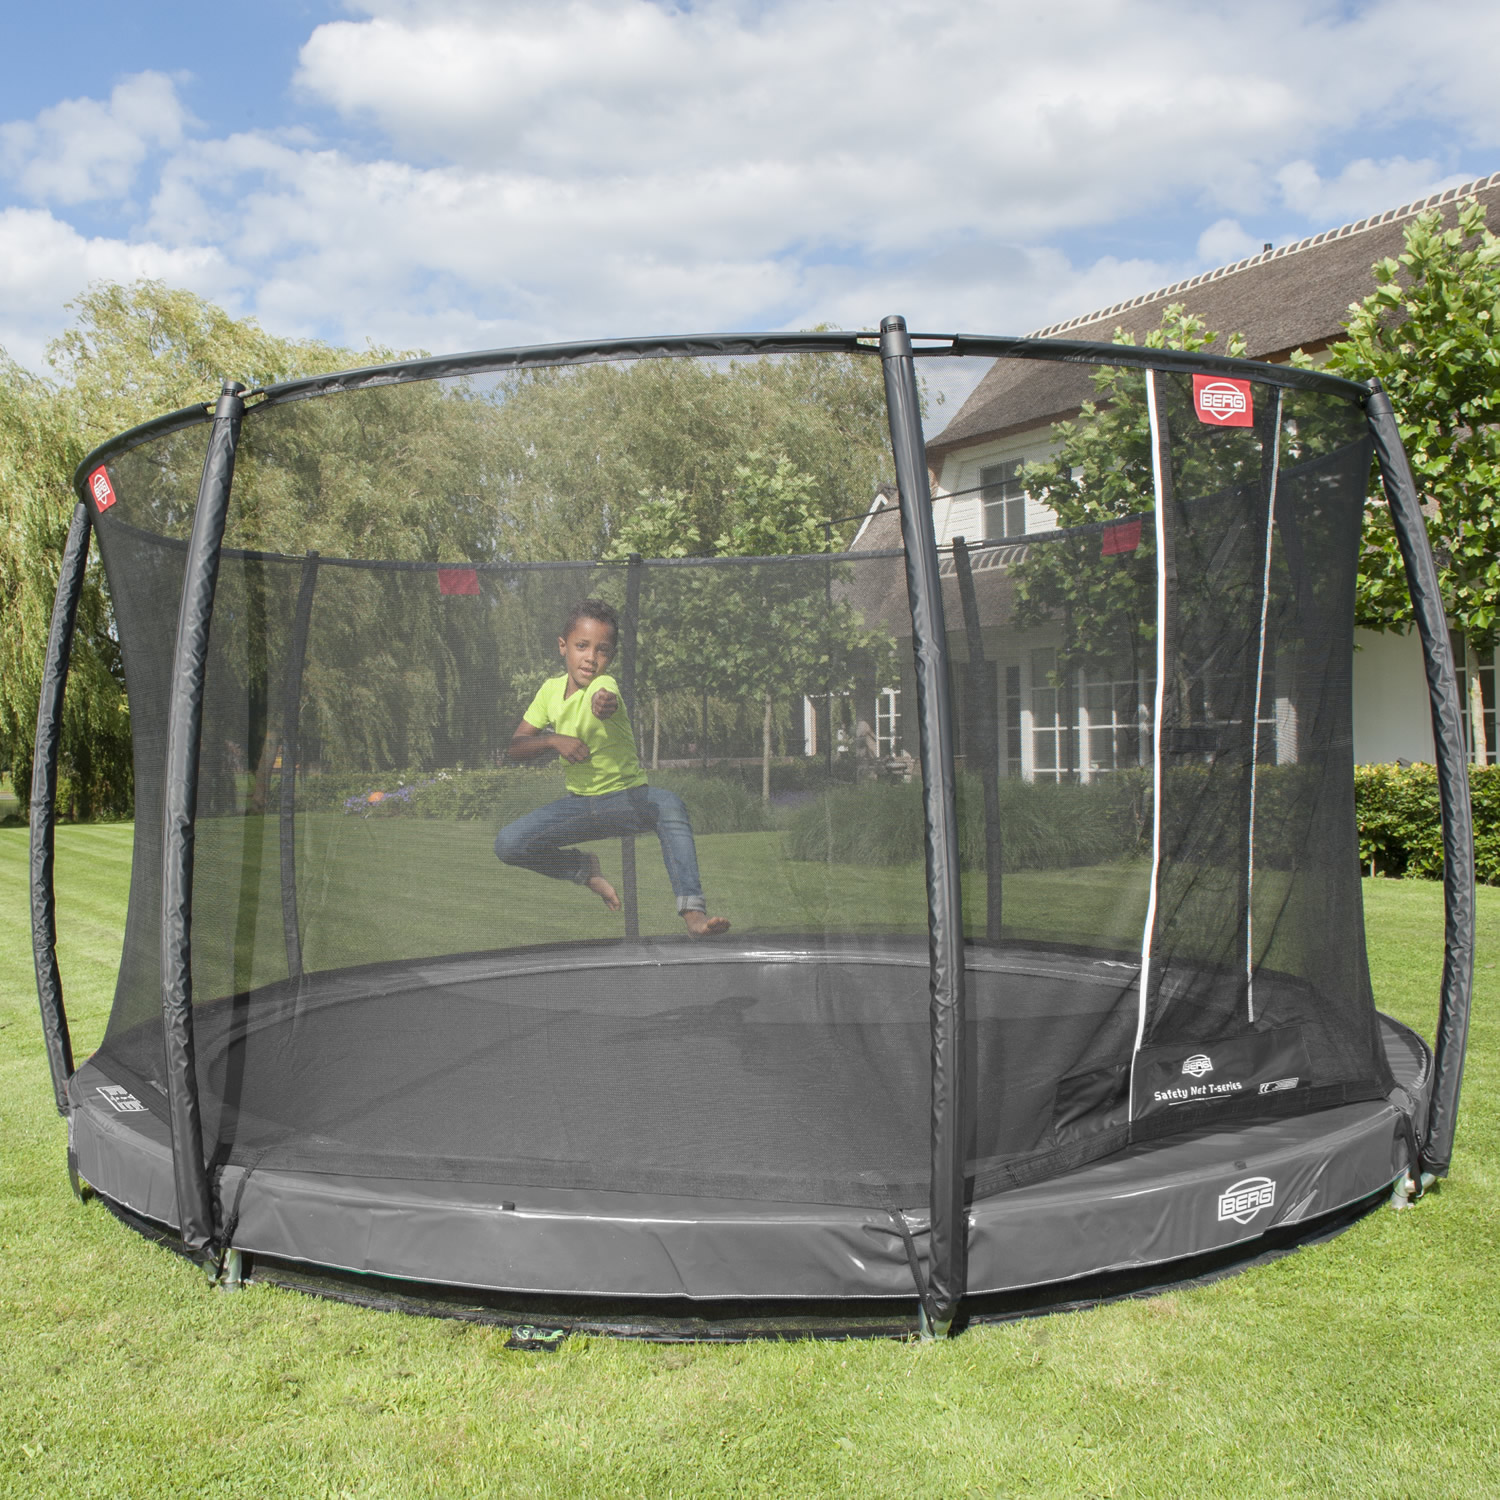 Gnaven del fly Berg Elite InGround 330 Grey incl. Safety Net Deluxe - Best quality,  biggest choice